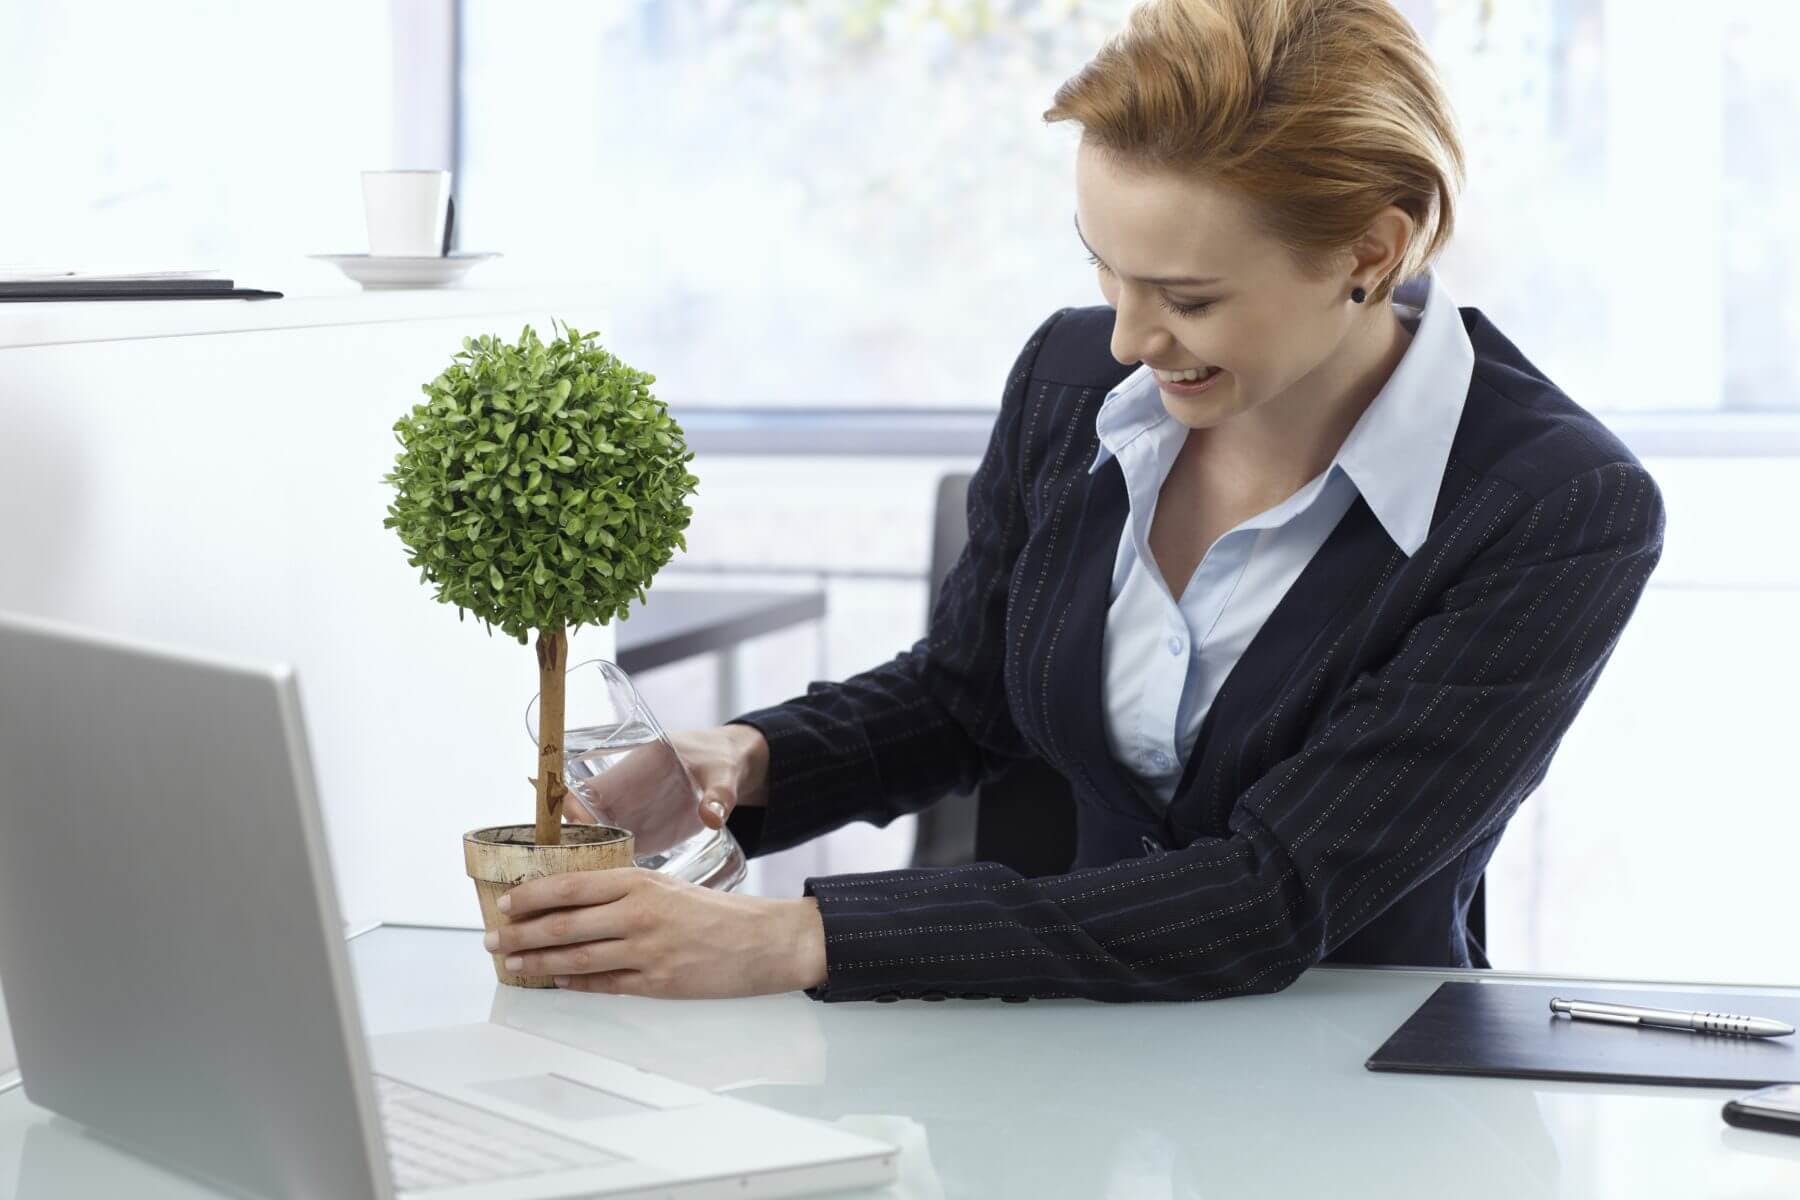 plants used for green accesnts in office